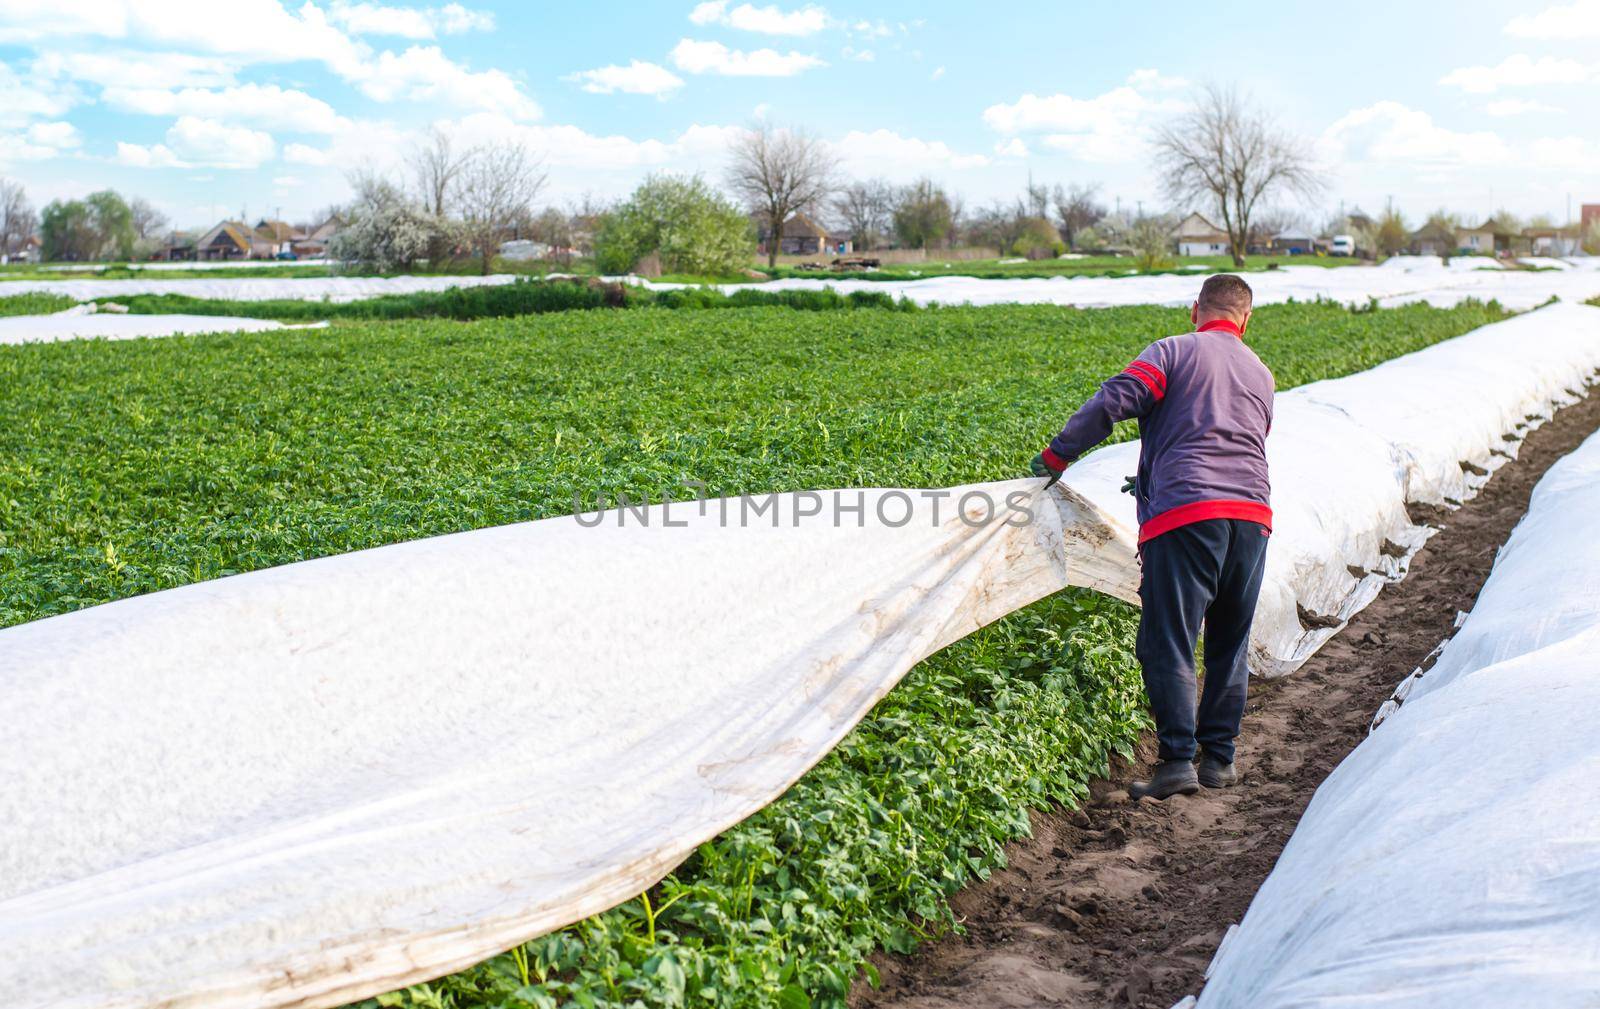 A farmer opens rows of agrofibre potato bushes in late spring. Opening of young potatoes plants as it warms. Greenhouse effect for care and protection. Agroindustry. Hardening of plants by iLixe48